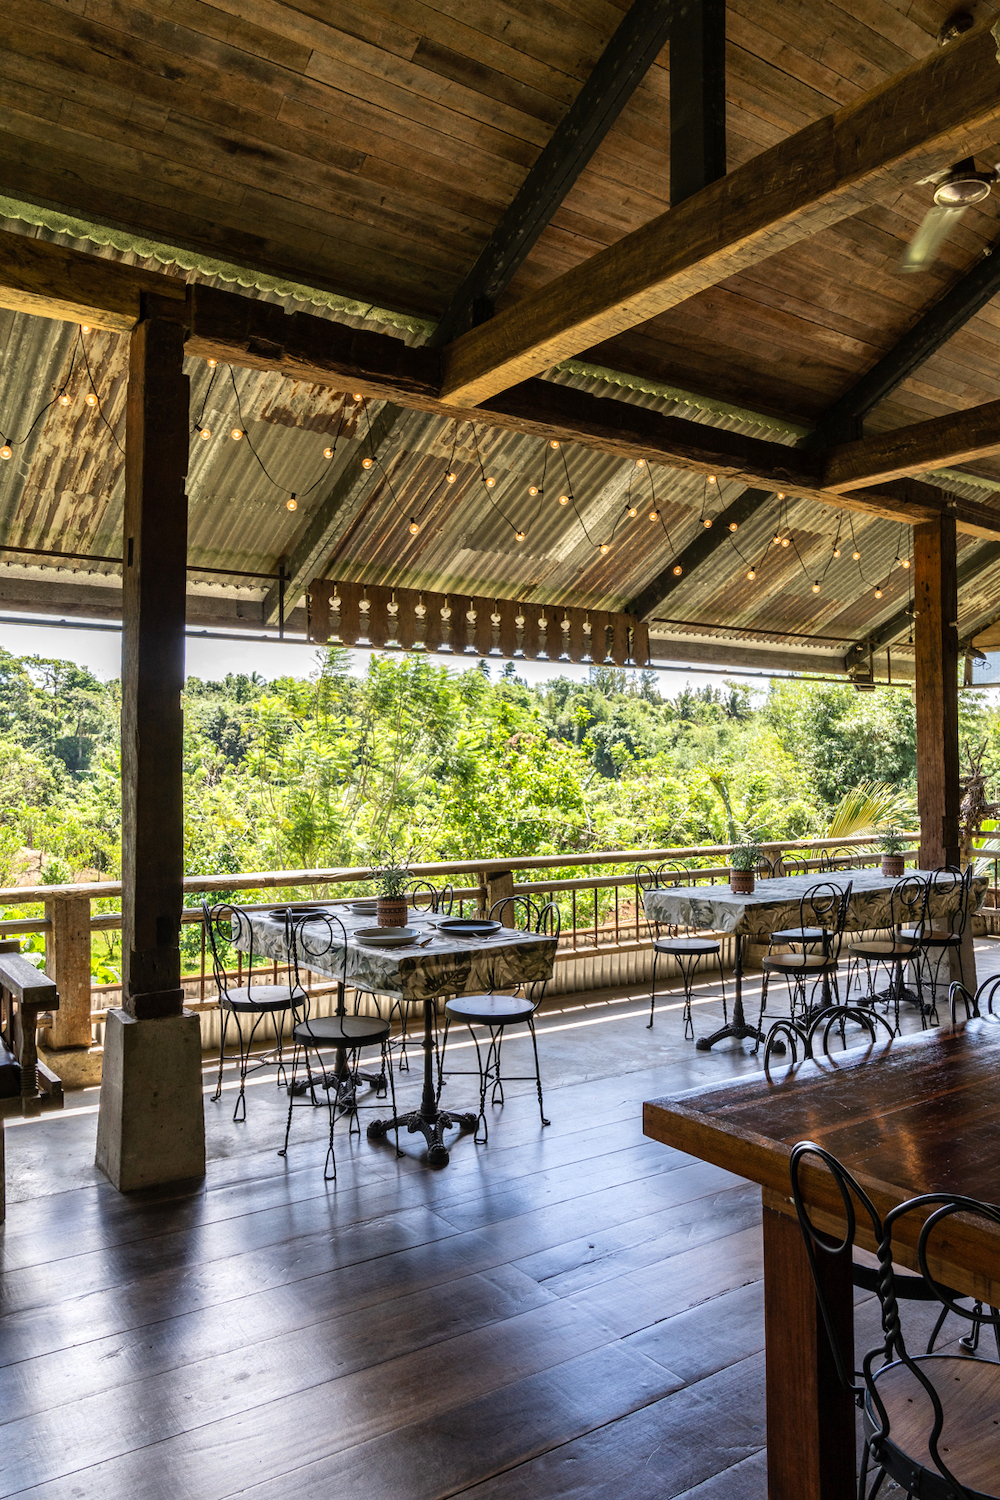 The main dining space of Tuny RestoFarm opens up with serene farm views